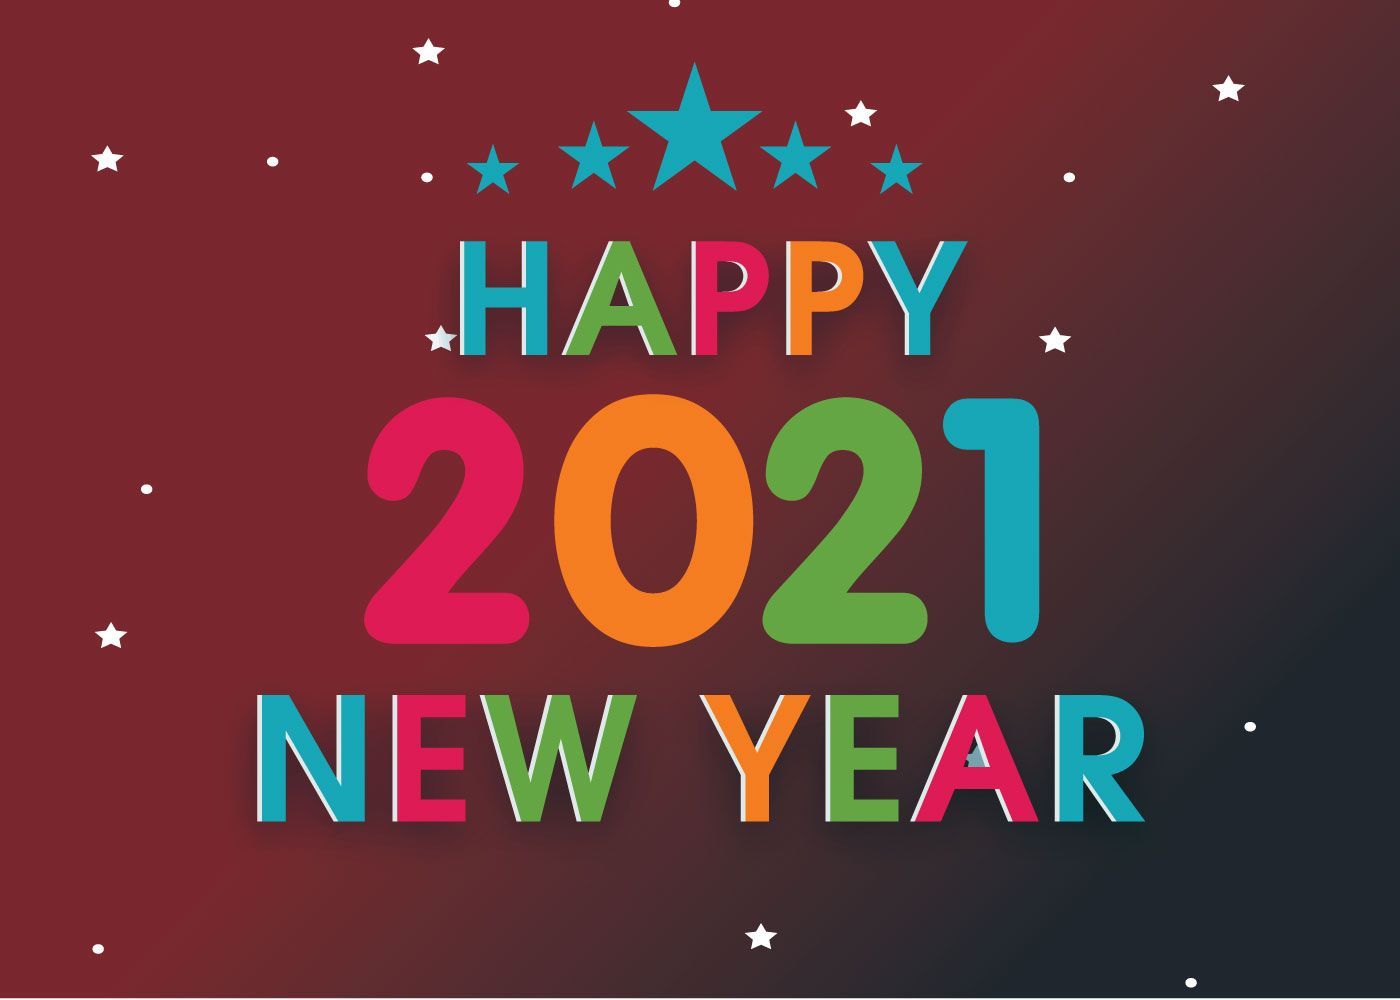 Happy New Year 2021 Image and Wallpaper. New year image, Happy new year wallpaper, Happy new year image